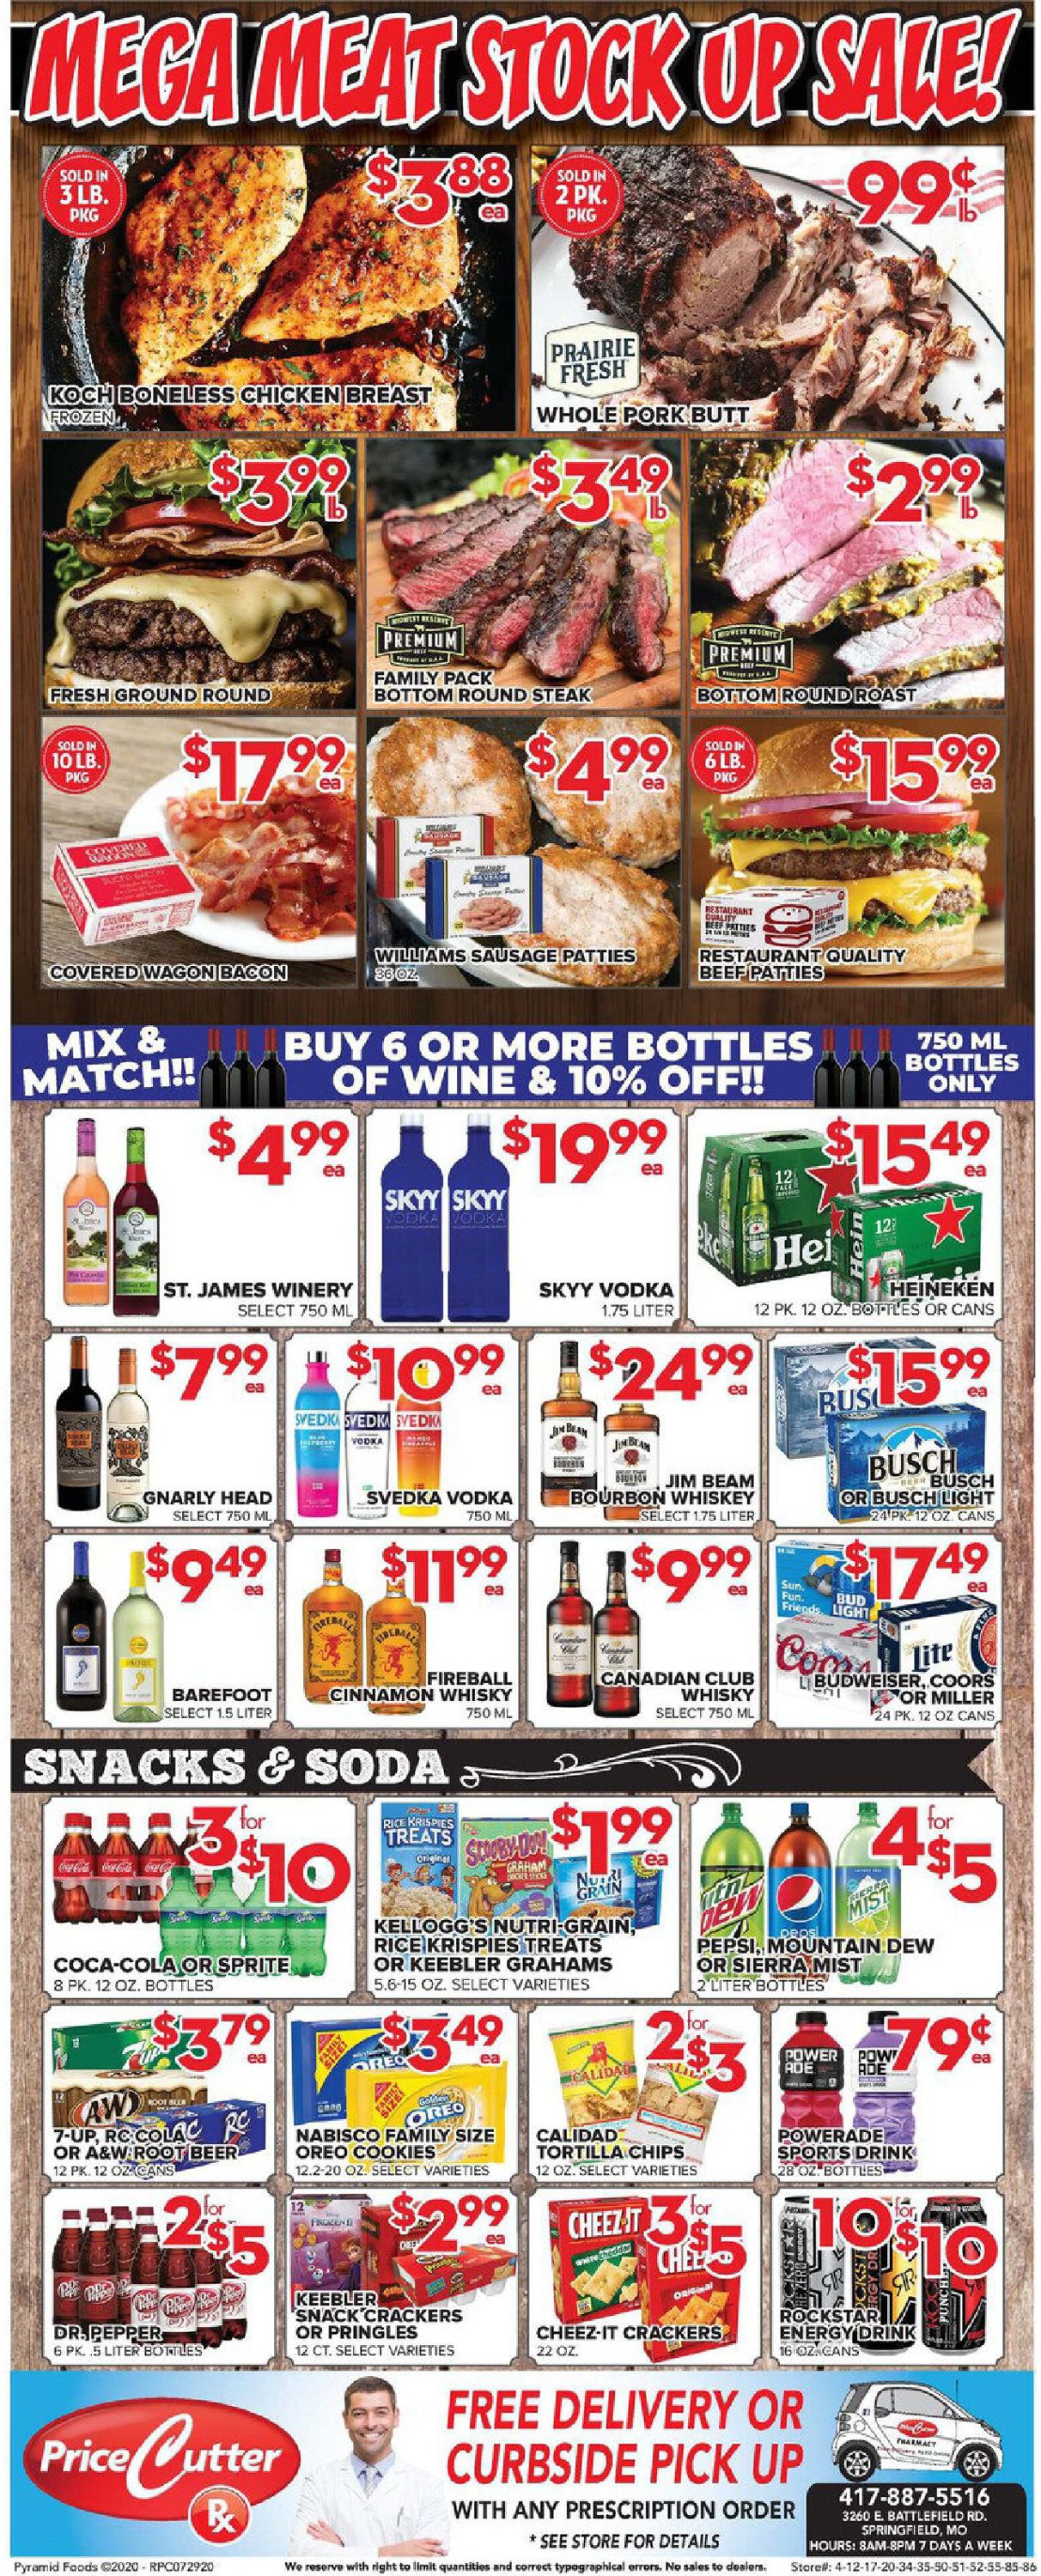 Price Cutter Weekly Ad Circular - valid 07/29-08/04/2020 (Page 4)